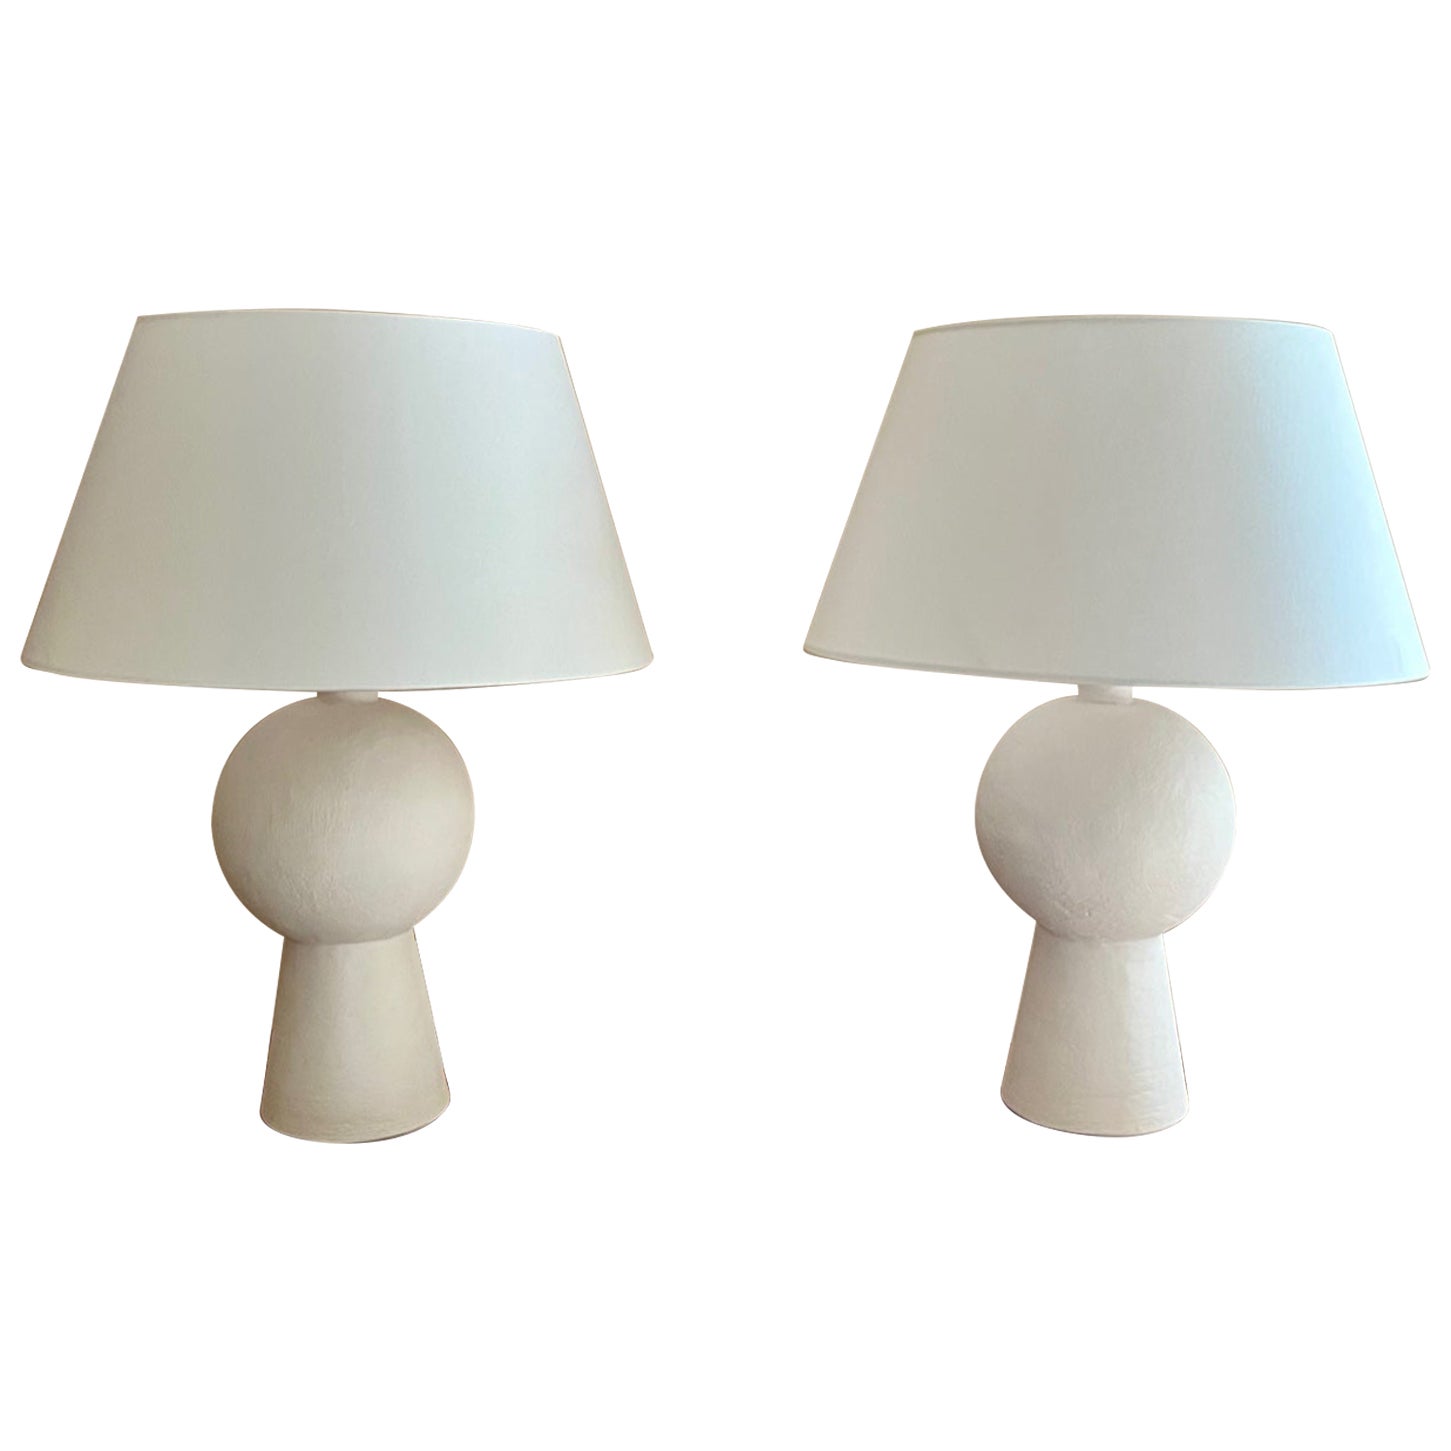 Pair of Stuccoed Plaster Table Lamps